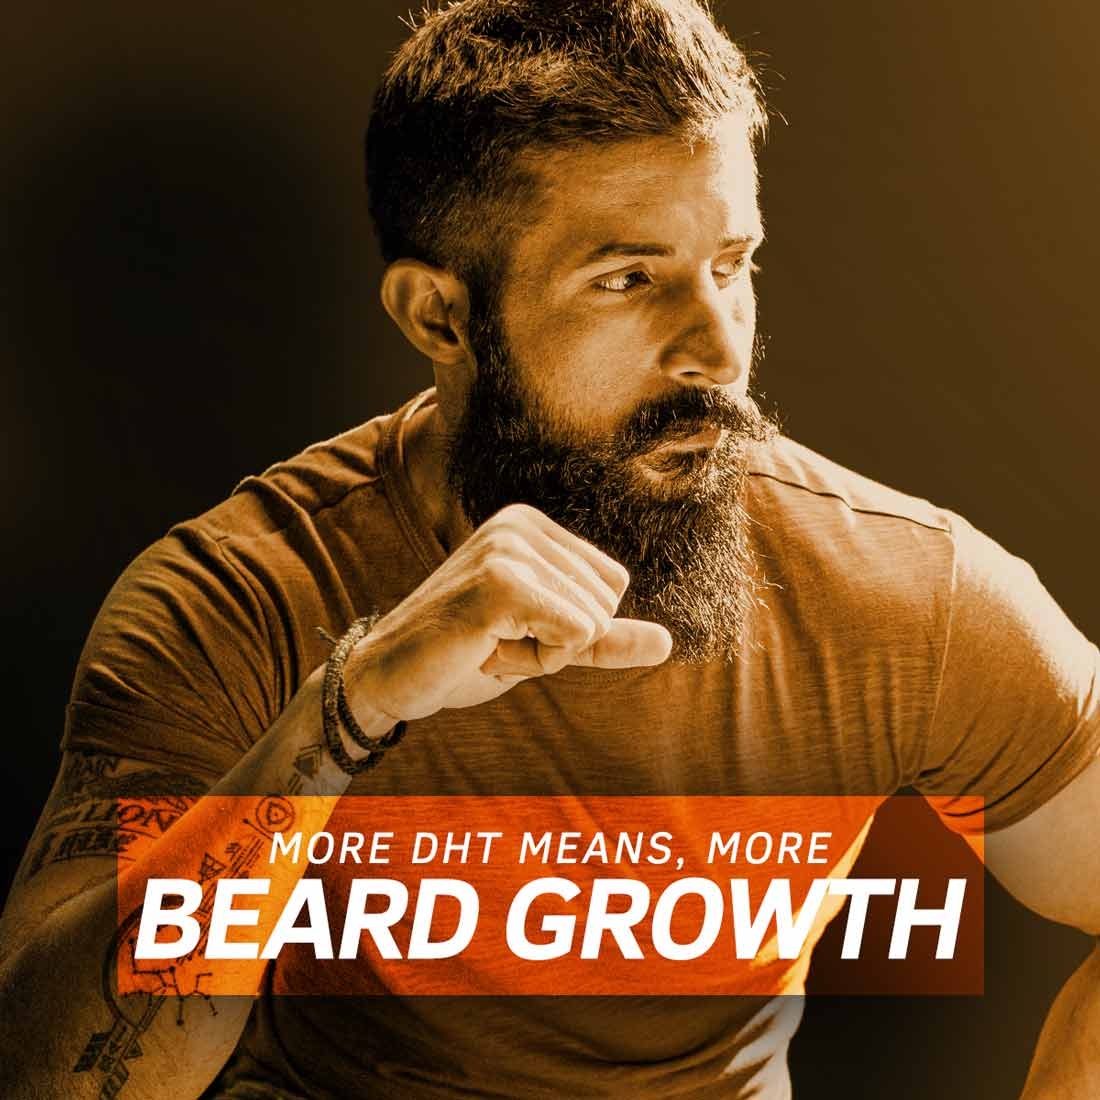 Ustraa | Beard growth Oil - Advanced (With Dht Boosters) - 60ml 3